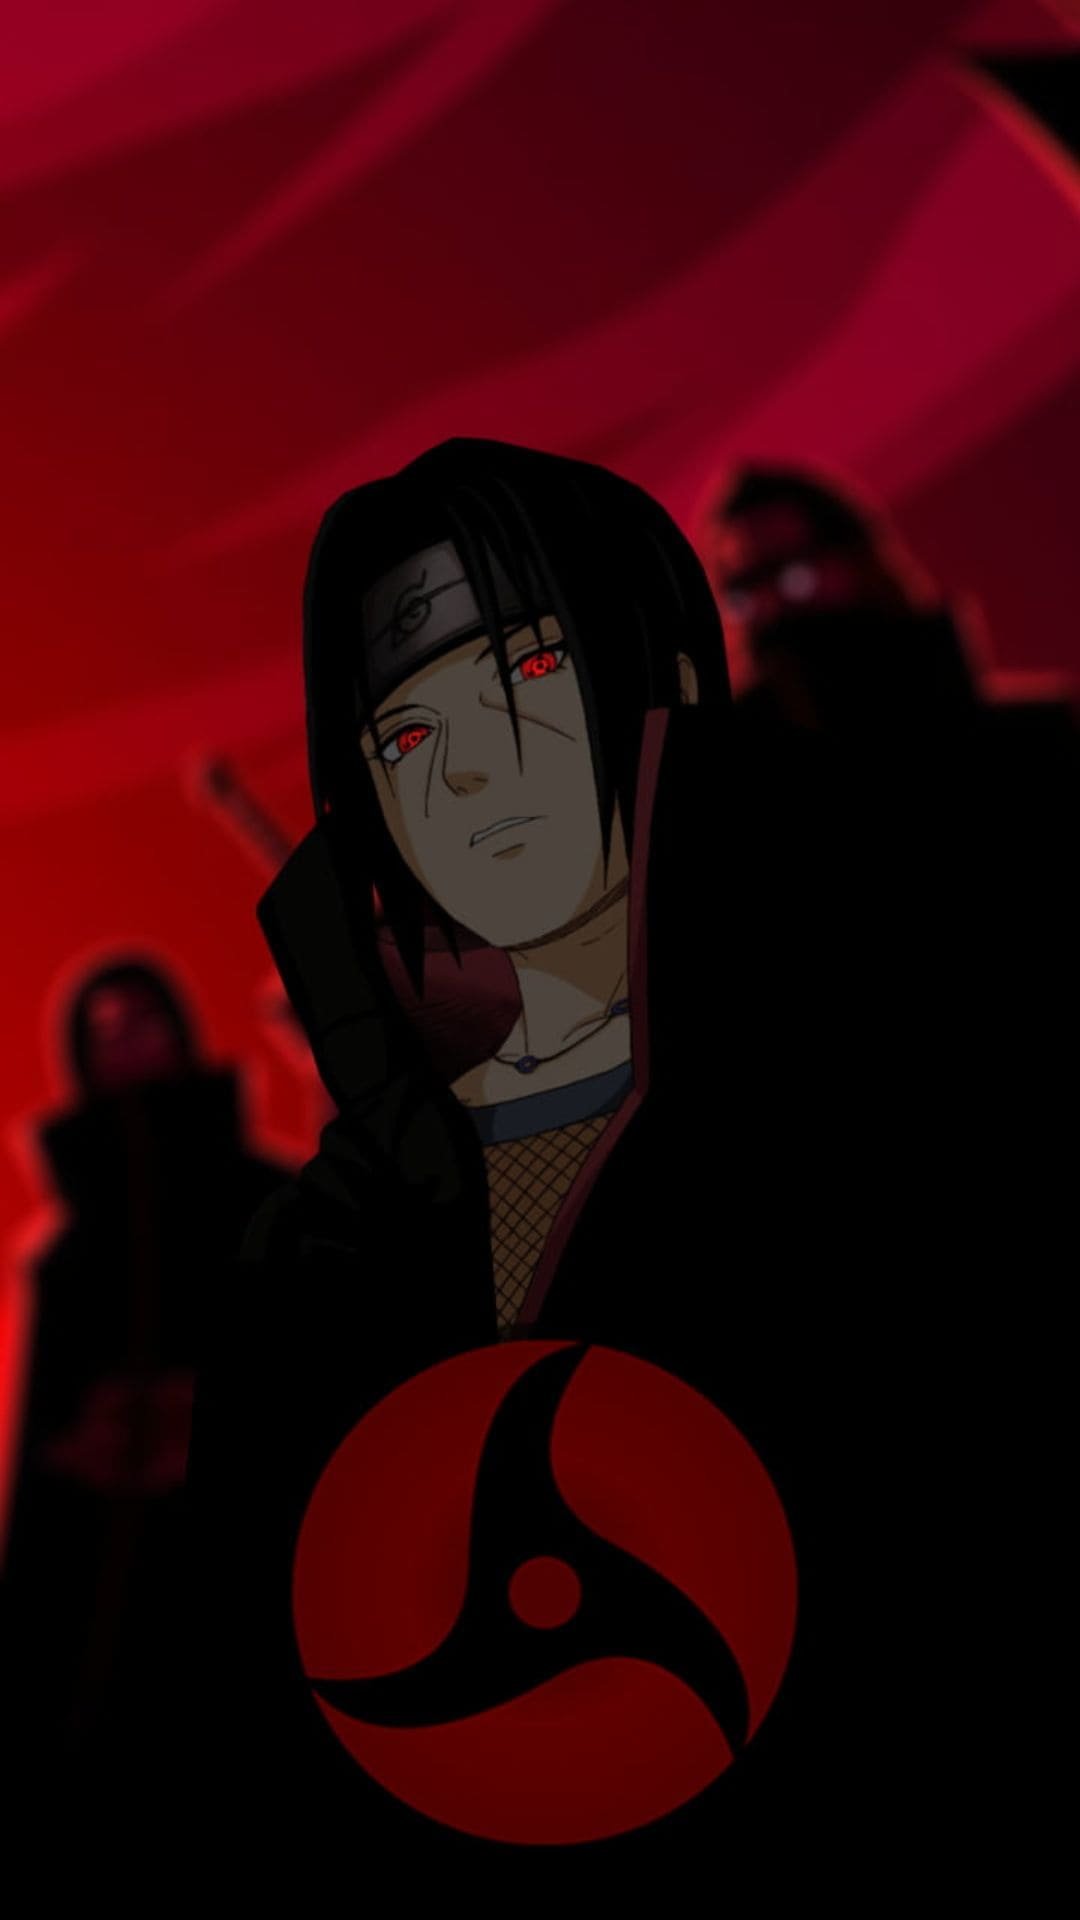 4K Moon iTachi Wallpaper for iPhone Backgrounds from Naruto anime 15